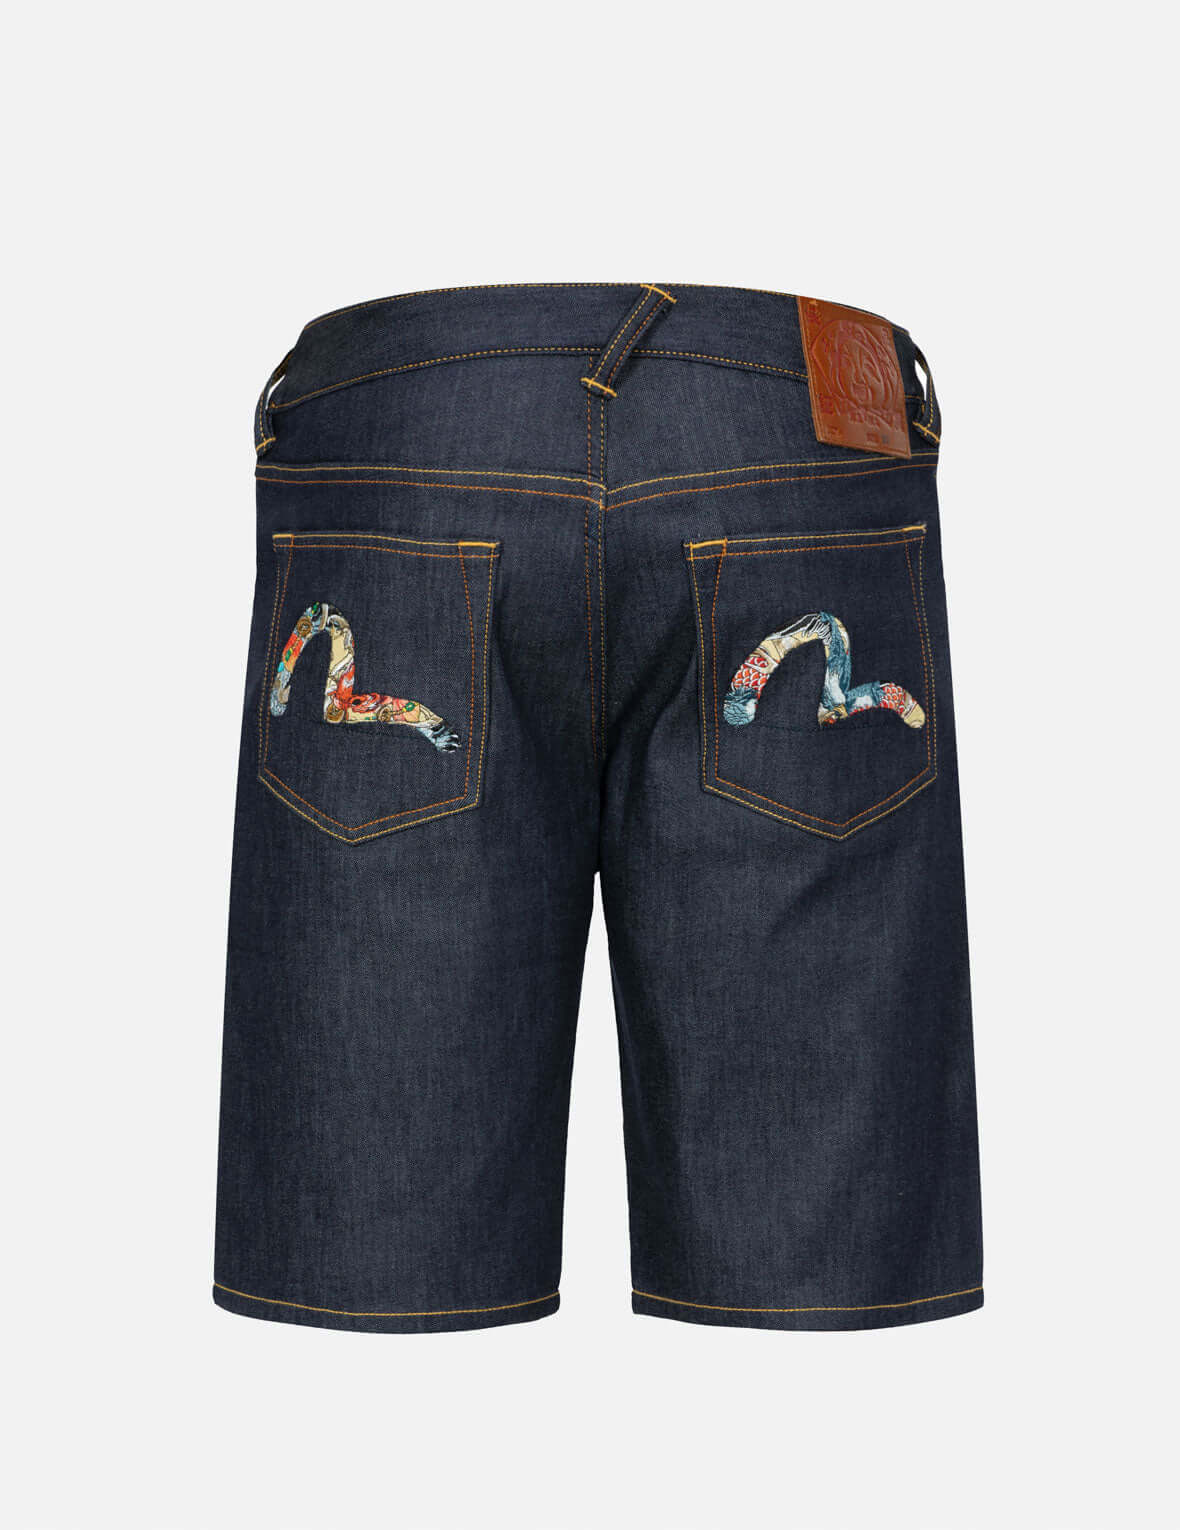 Evisu The Great Wave And Koi Seagull Embroidery Relax Fit Denim Short